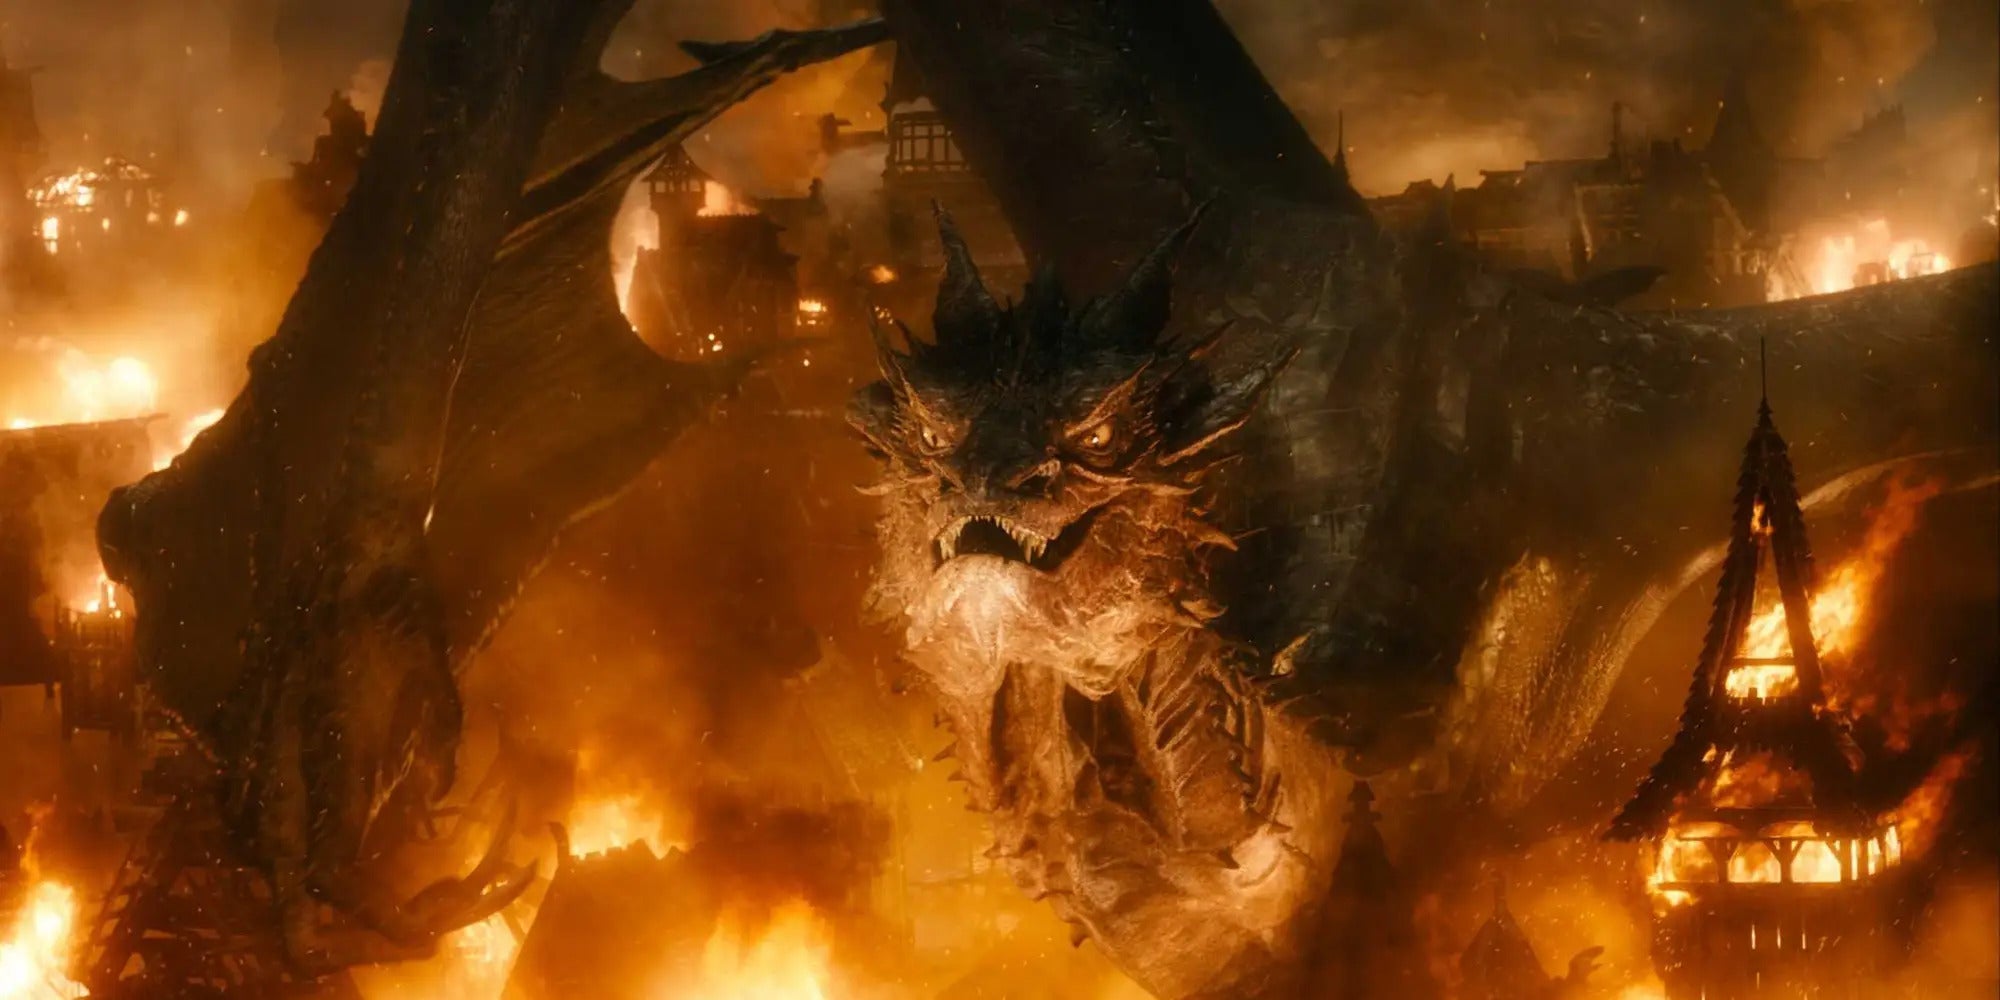 Smaug dragon in 'The Hobbit' film